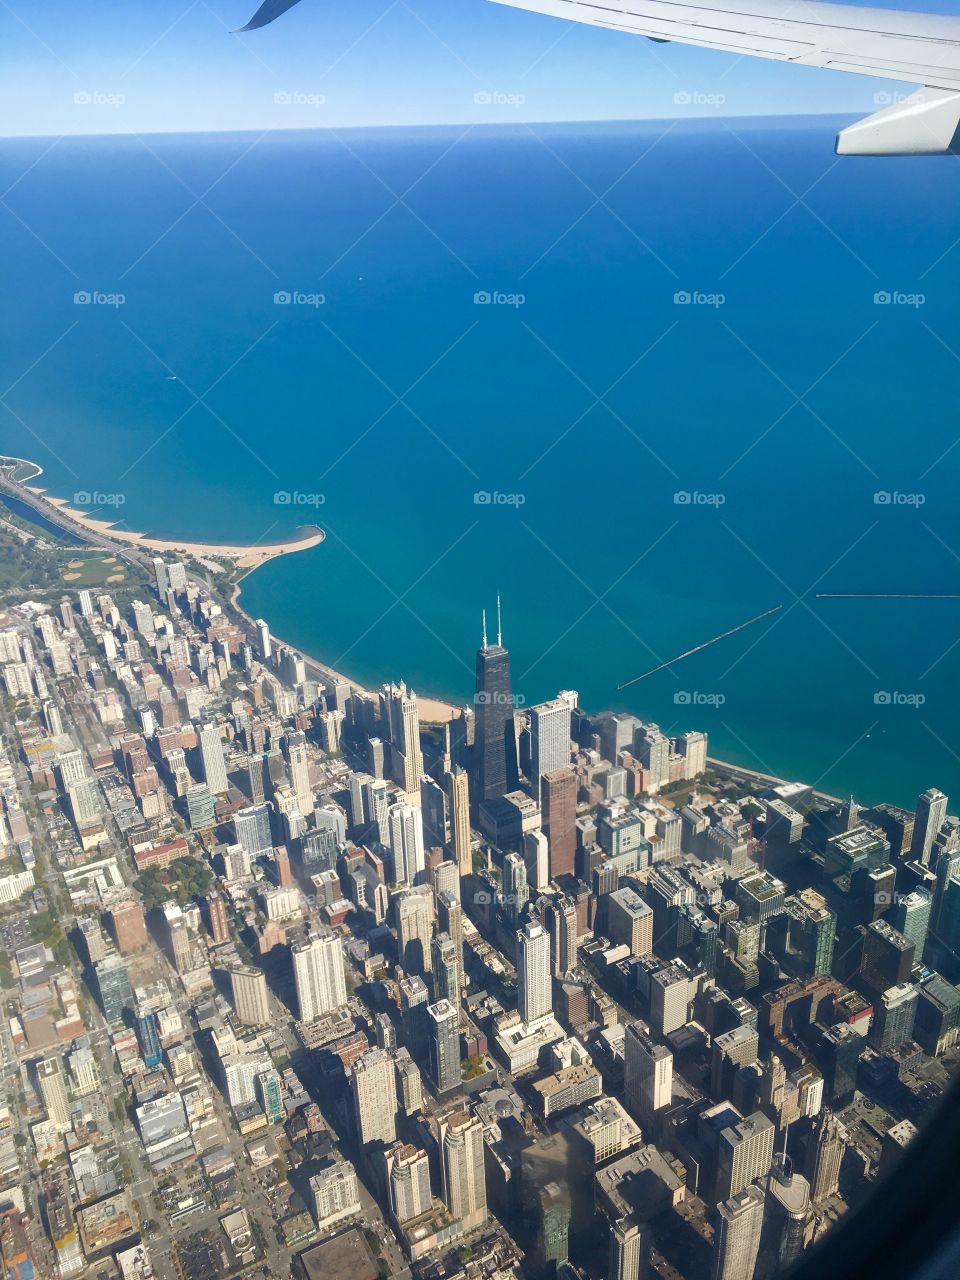 Chicago from an airplane 